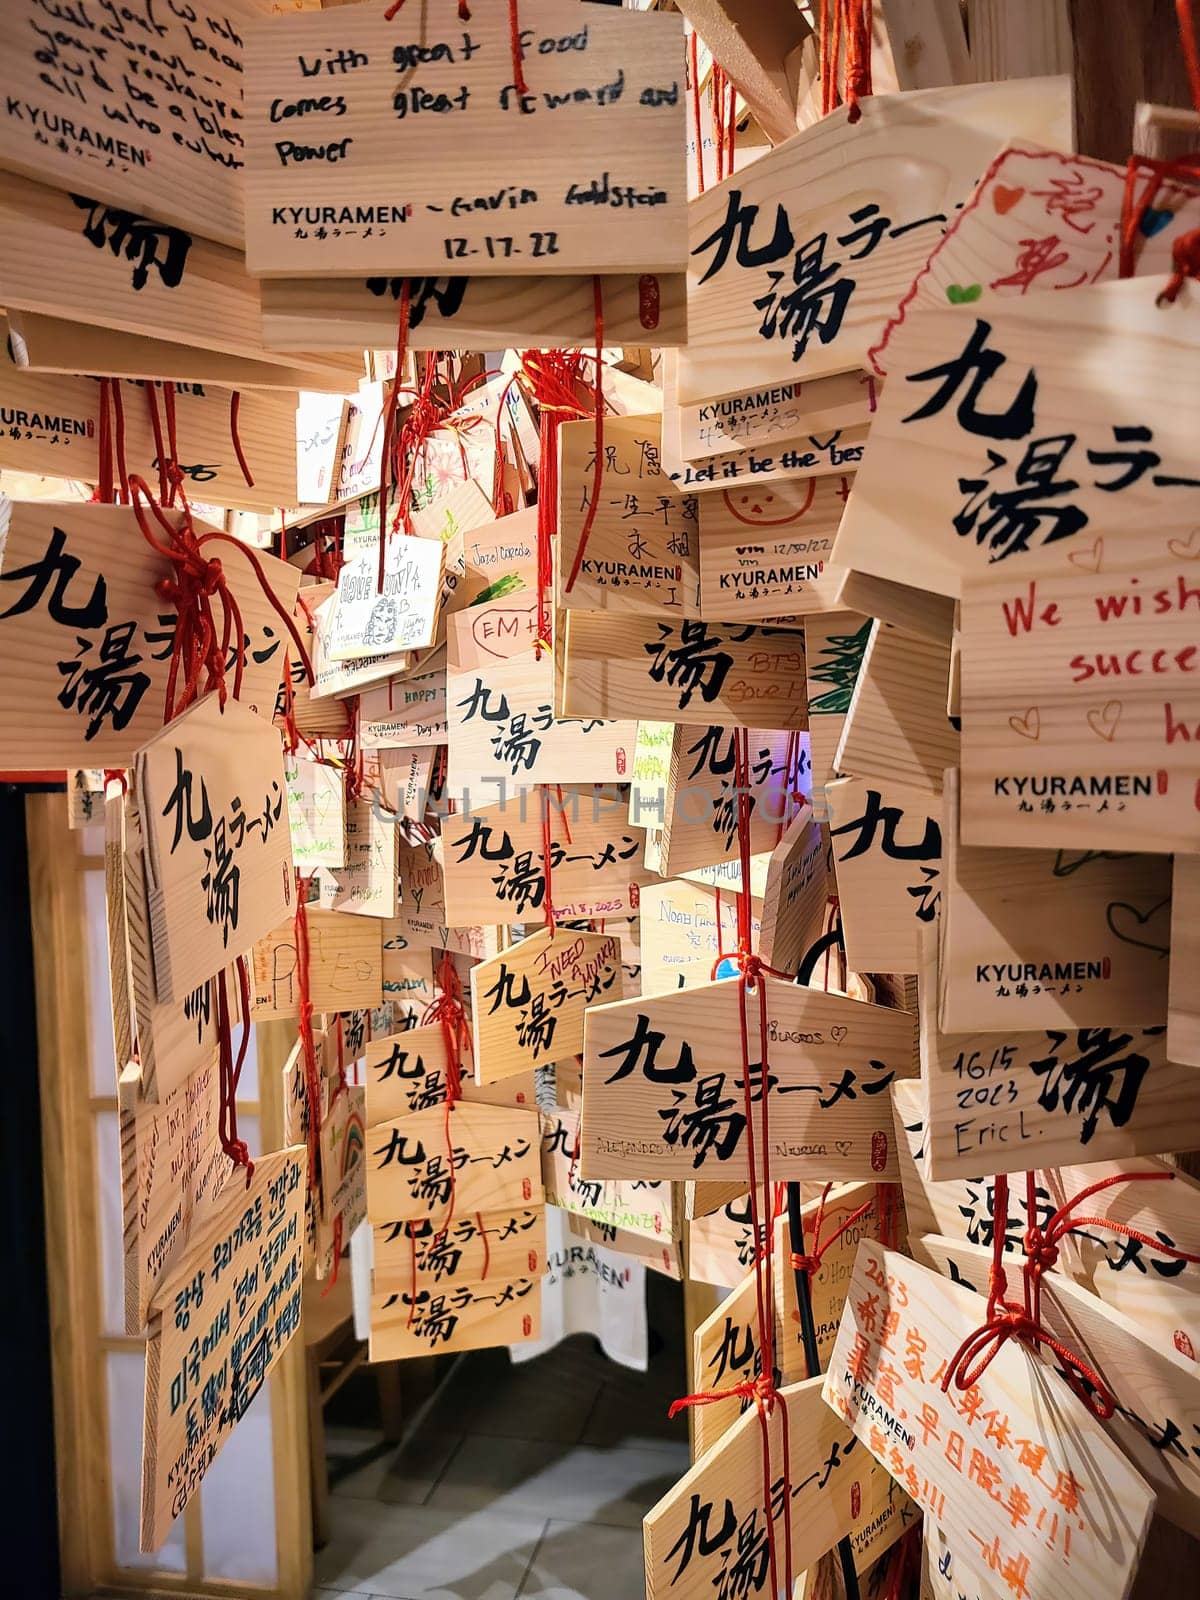 Dense collection of Ema, traditional Japanese wooden wishing plaques, hanging in a Chicago restaurant, Illinois, 2023, symbolizing hope, culture and community.